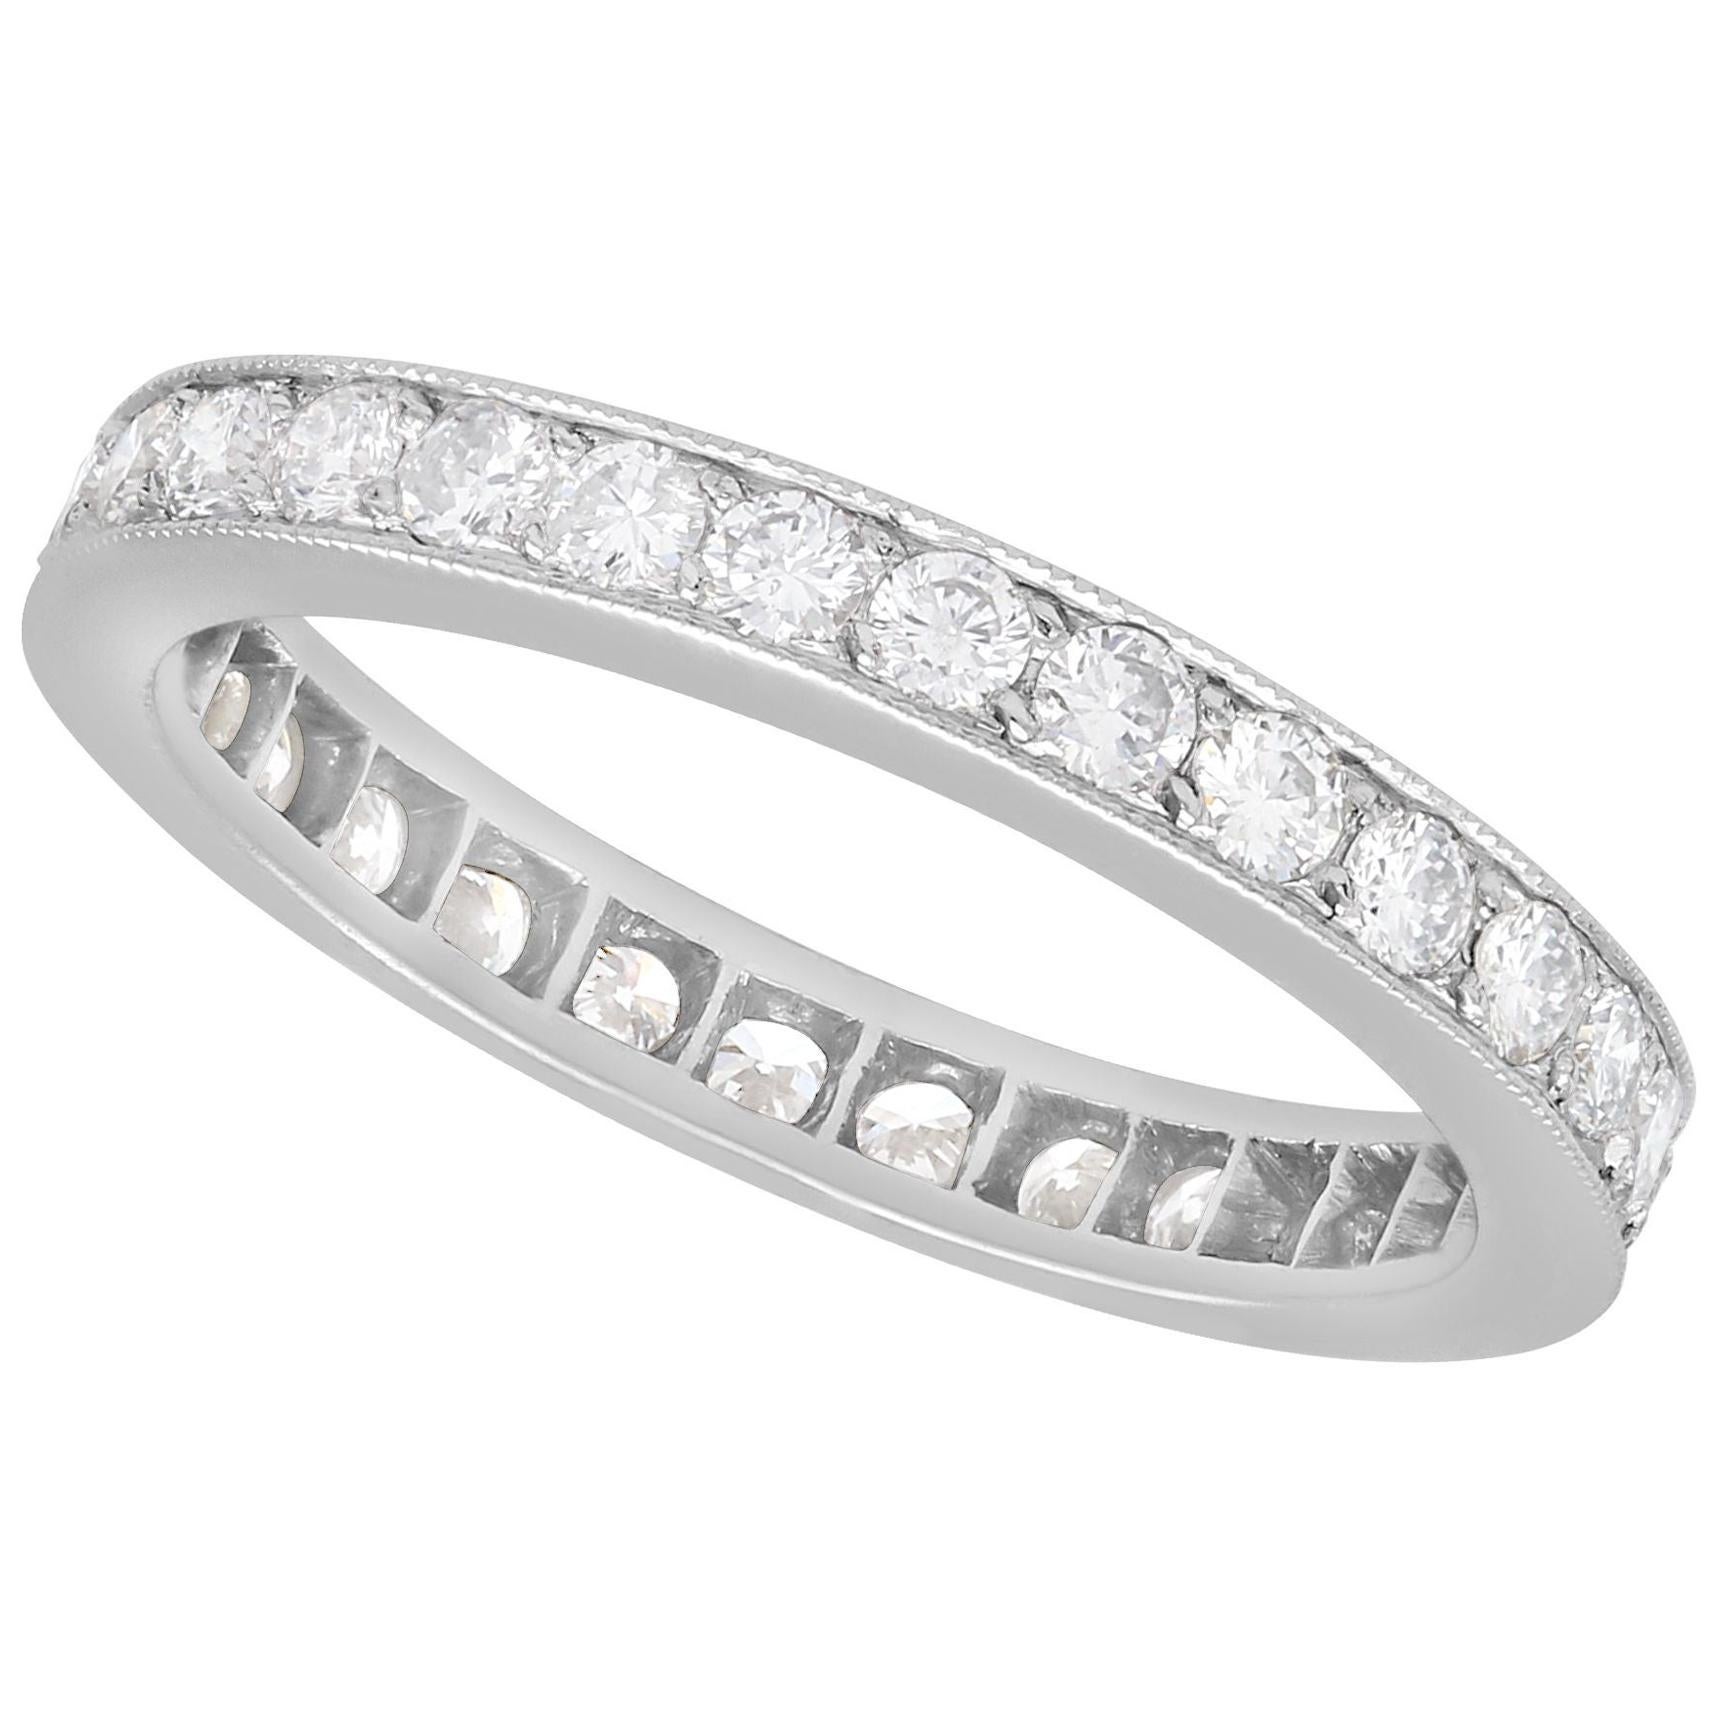 1940s French 1.02 Carat Diamond and White Gold Full Eternity Ring